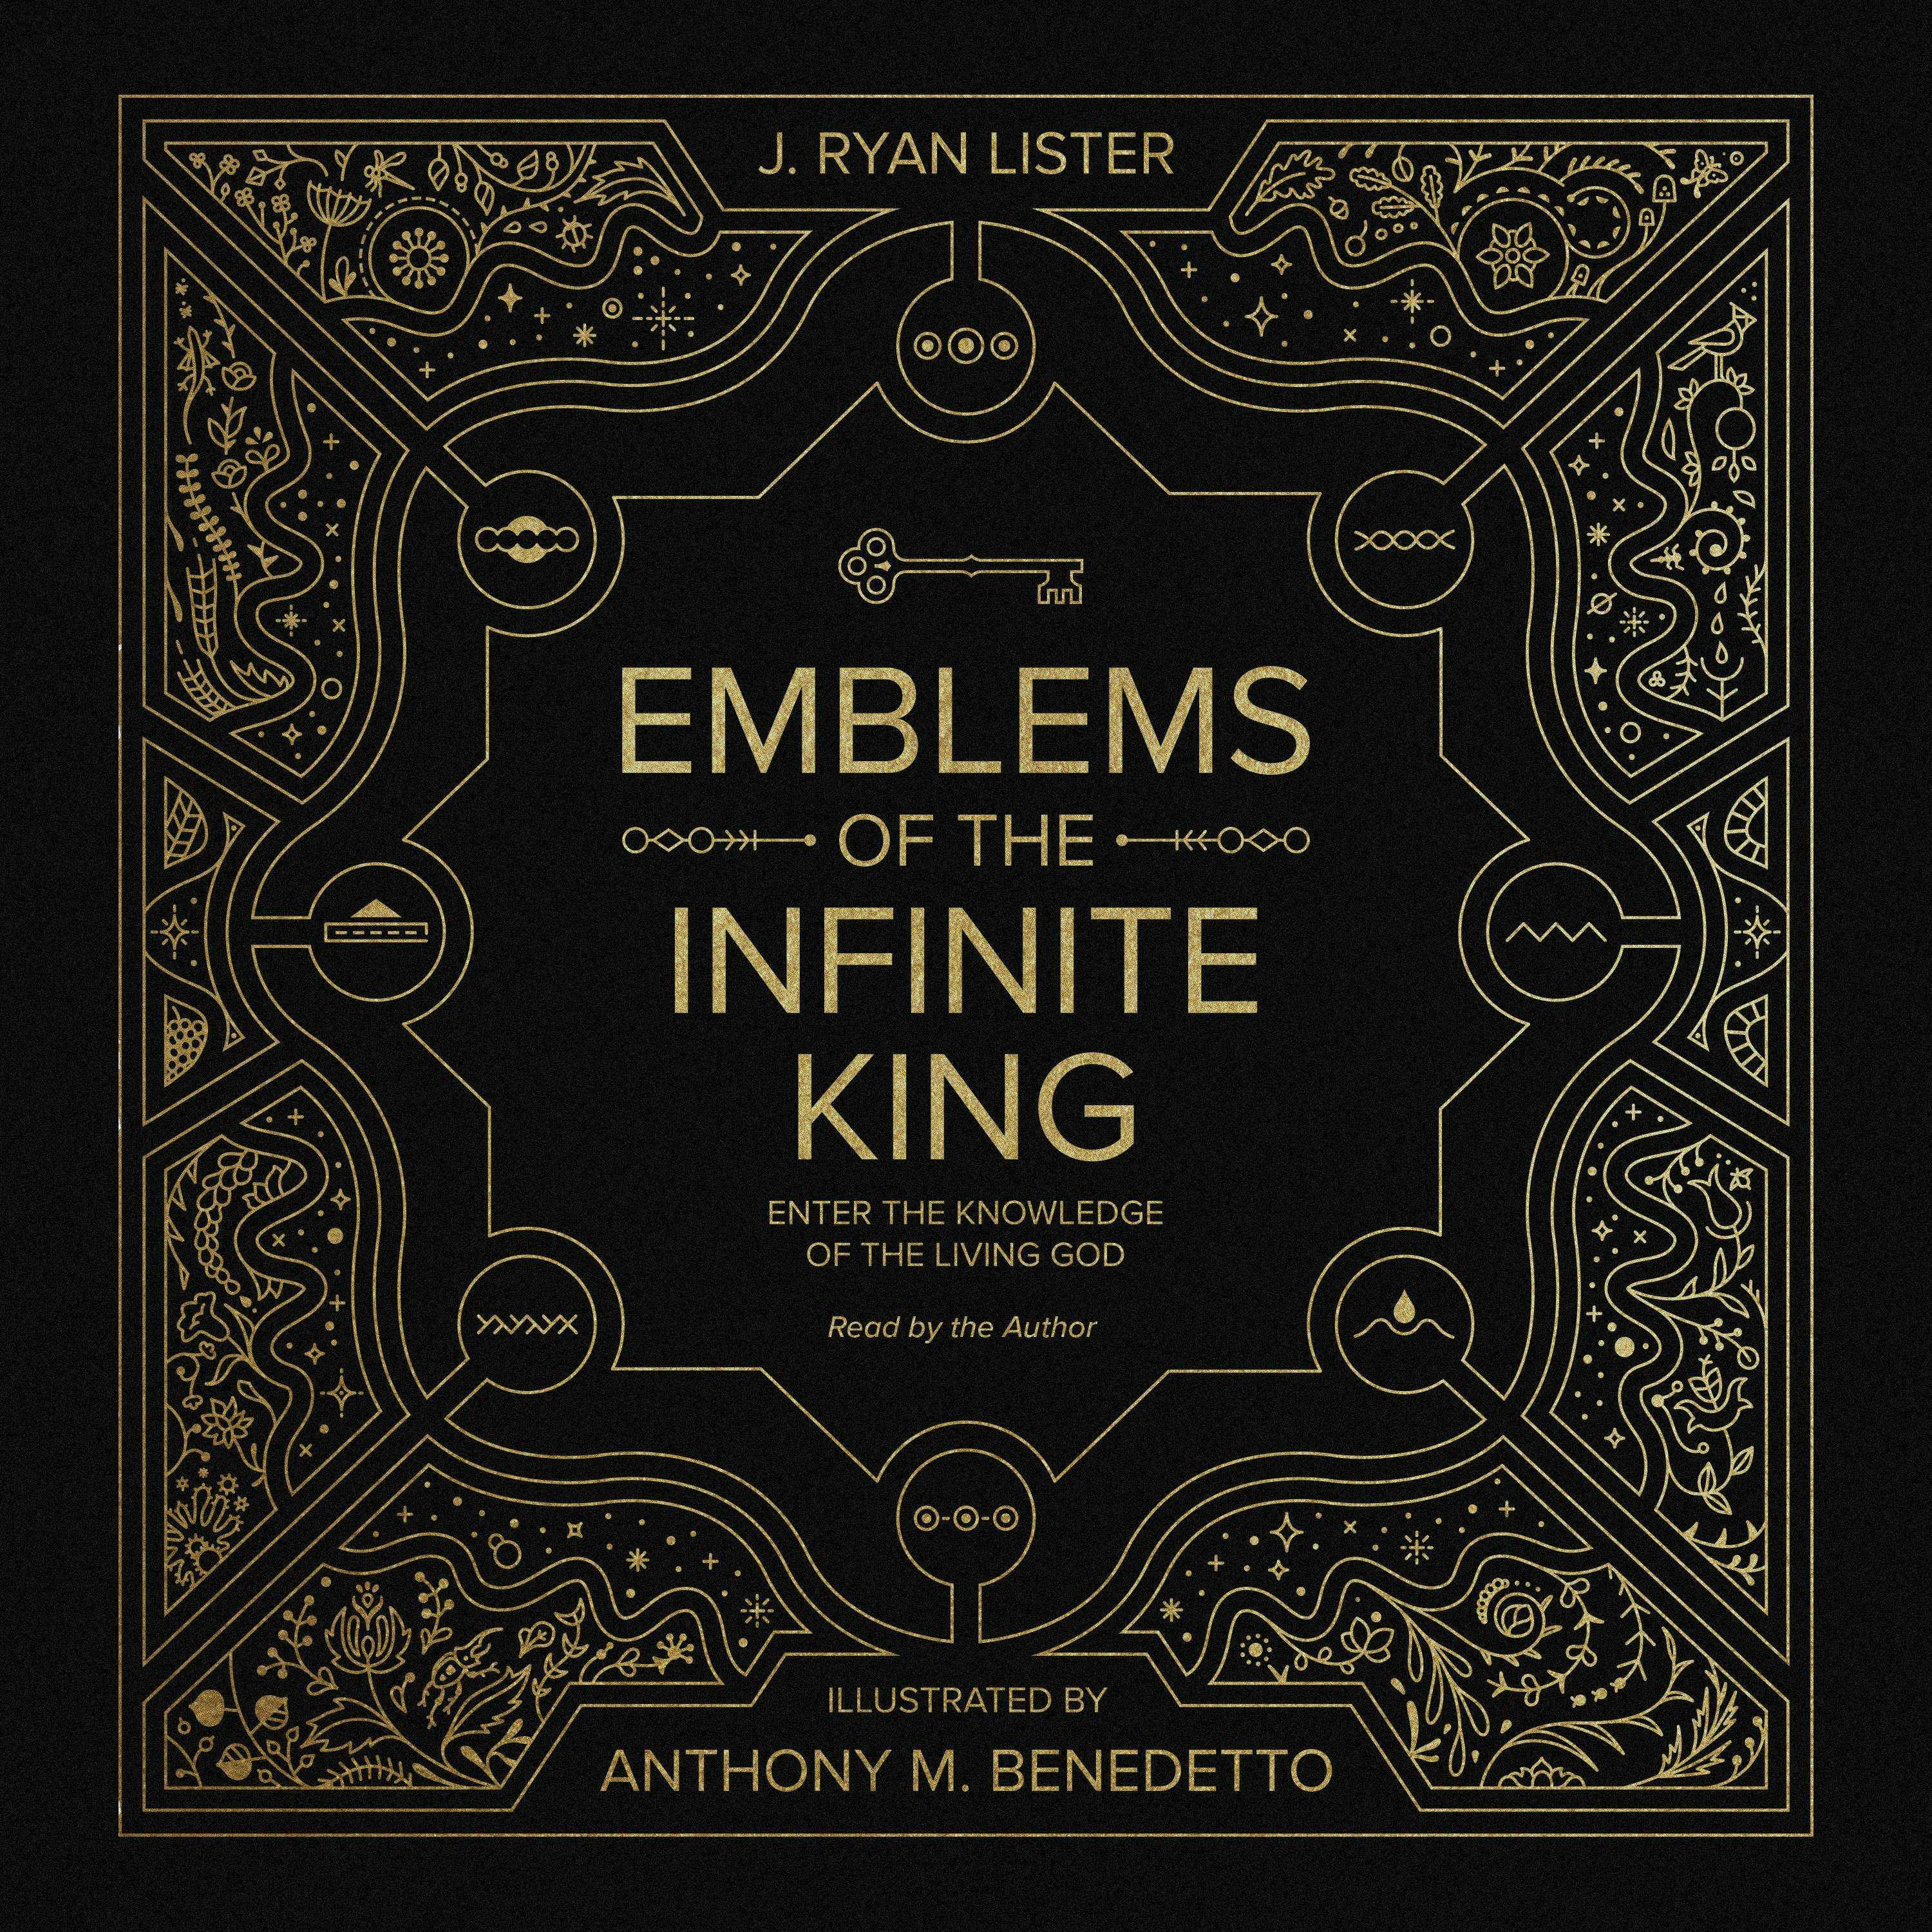 Emblems of the Infinite King: Enter the Knowledge of the Living God - Anthony M. Benedetto, J. Ryan Lister